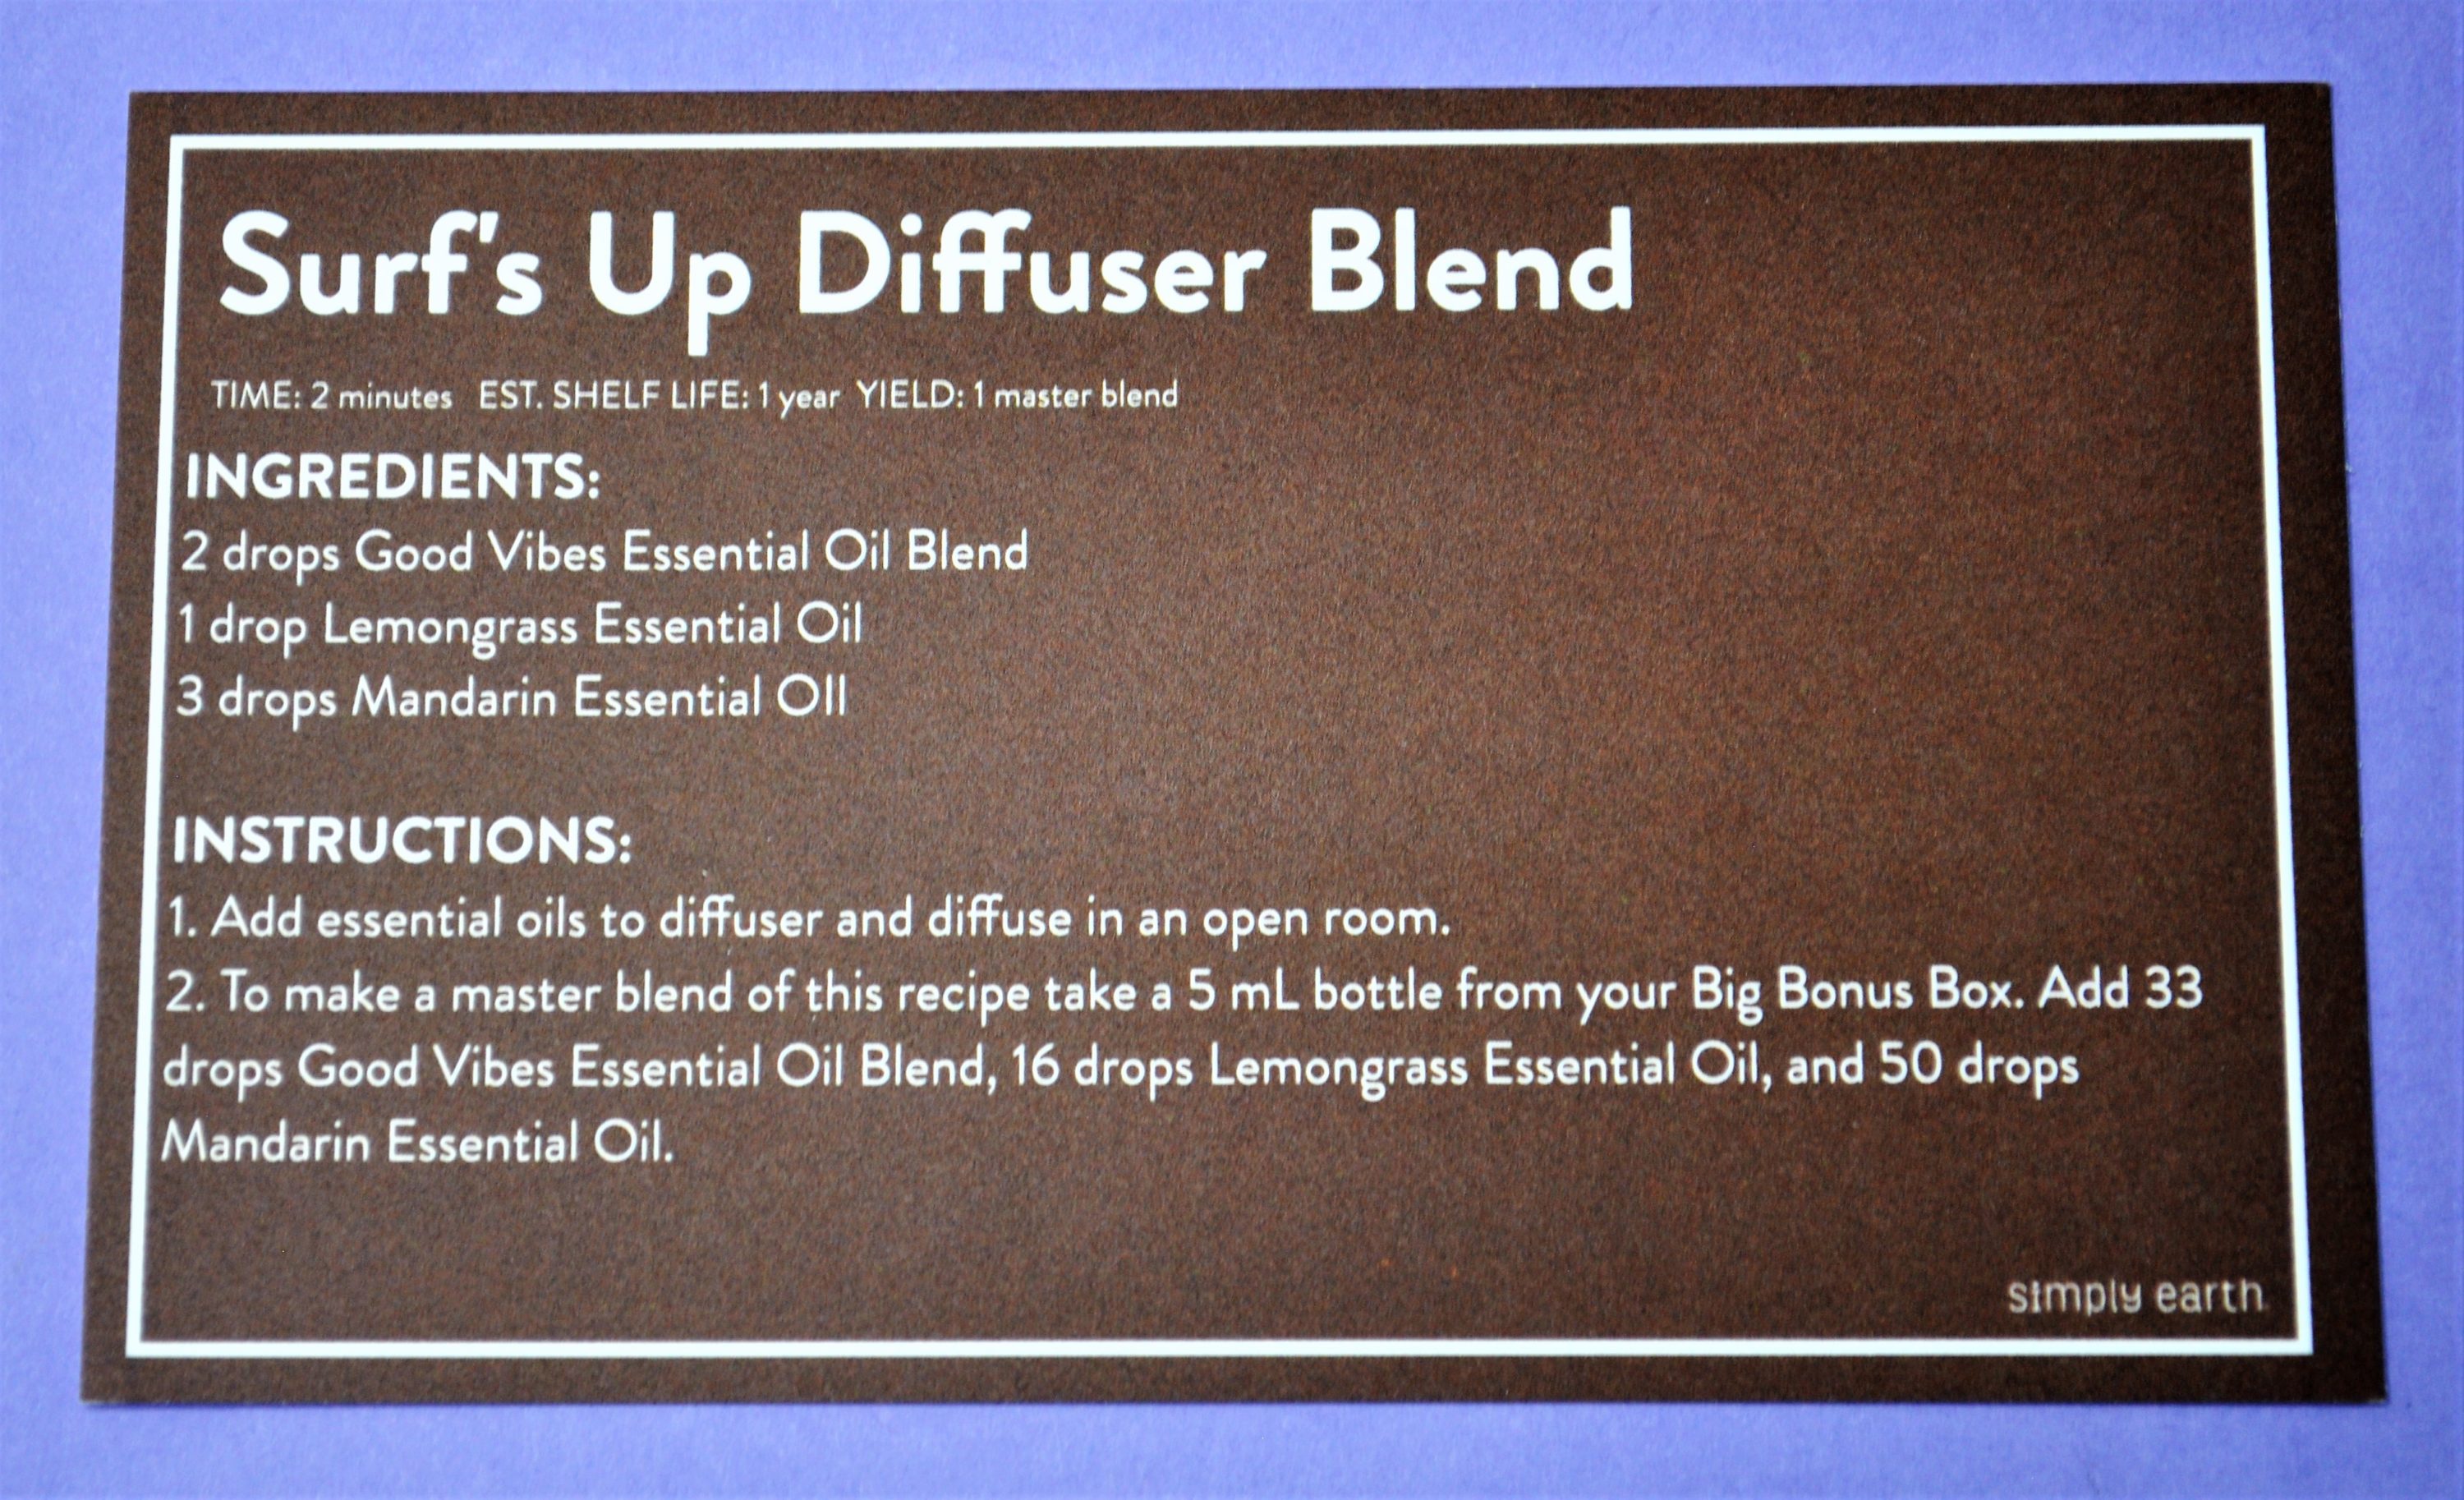 Simply Earth Surf's Up Diffuser Blend